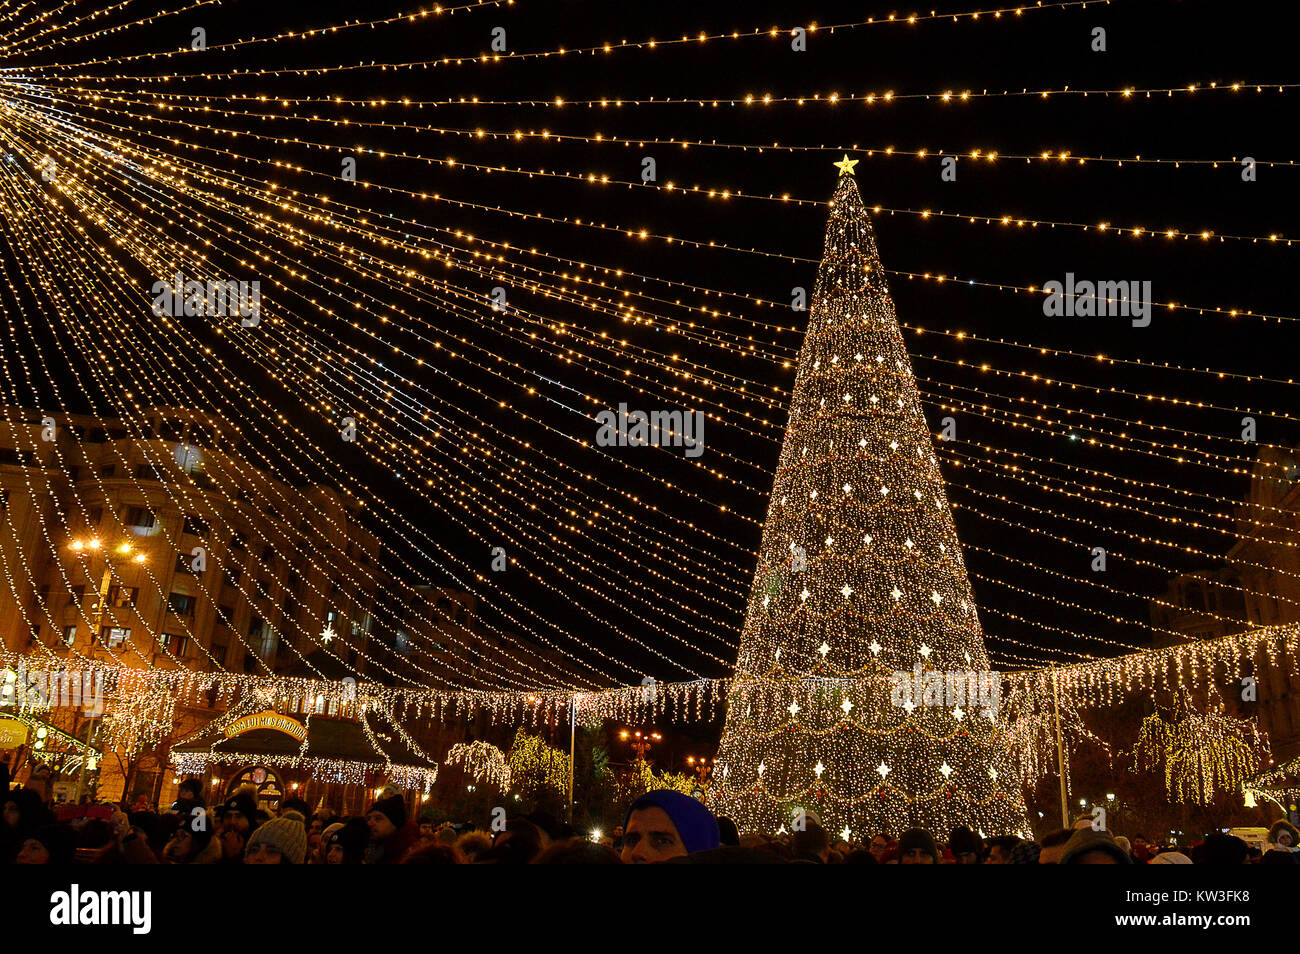 BUCHAREST, ROMANIA - 6 DECEMBER 2017: Crowds with Christmas tree and lights at the Christmas Fair/Christmas Market in Piata Constitutiei (Constitution Stock Photo